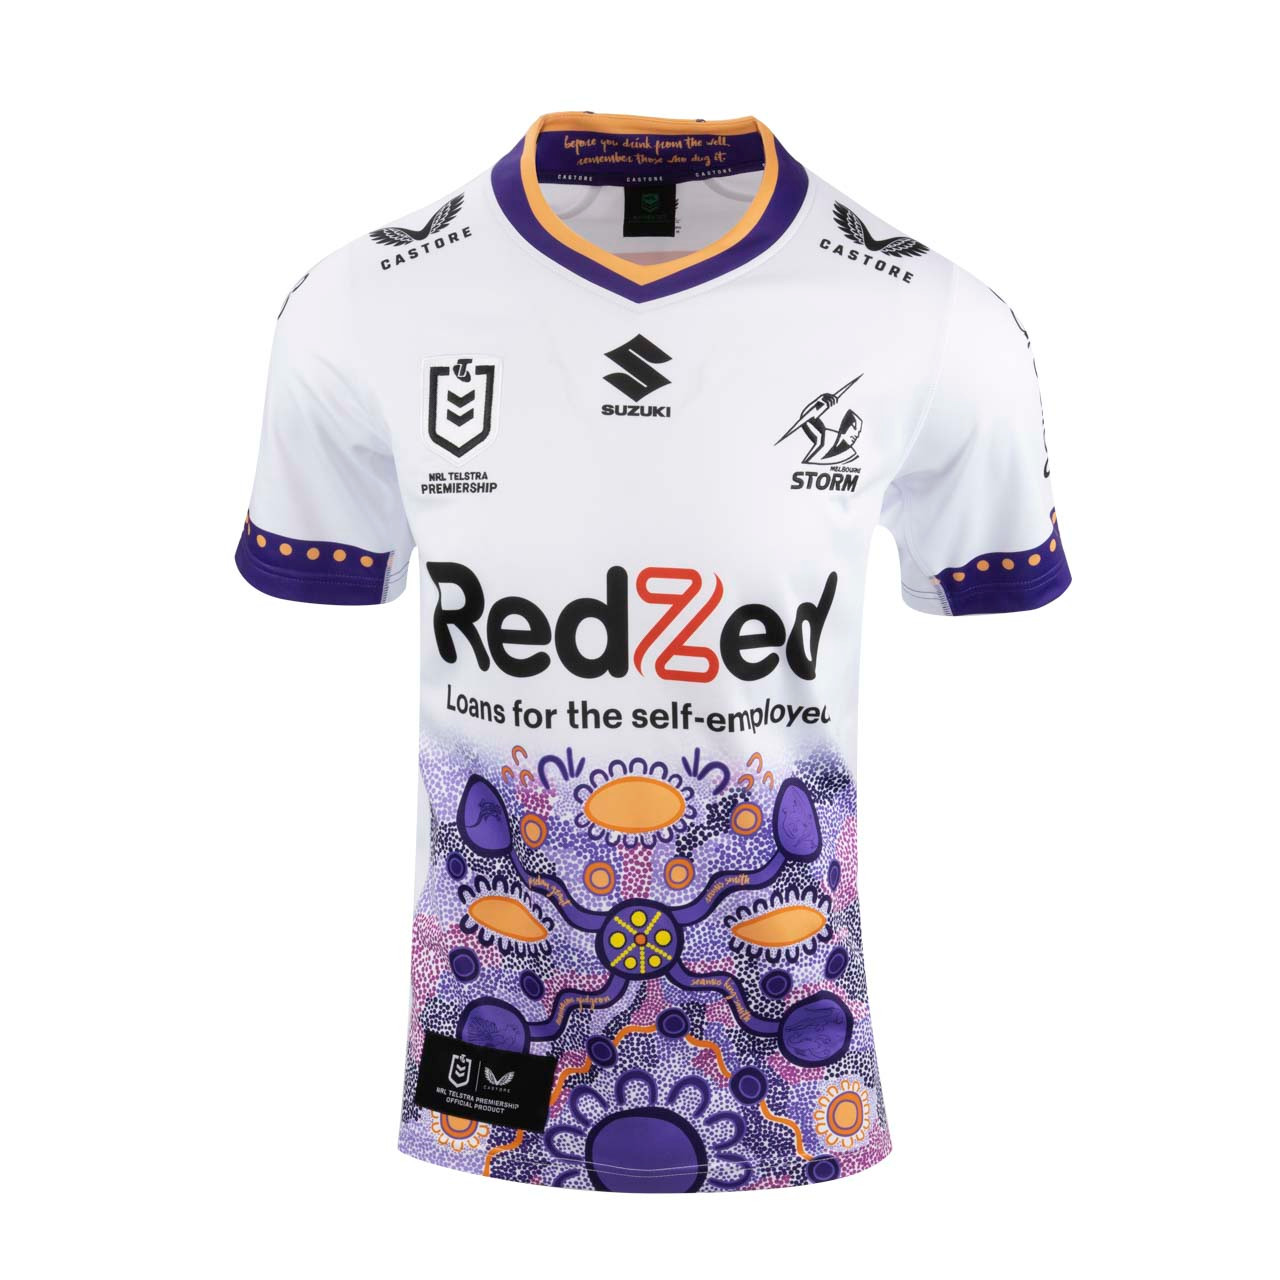 Presenting our 2023 Indigenous jersey; 'Resilience' by Shanai